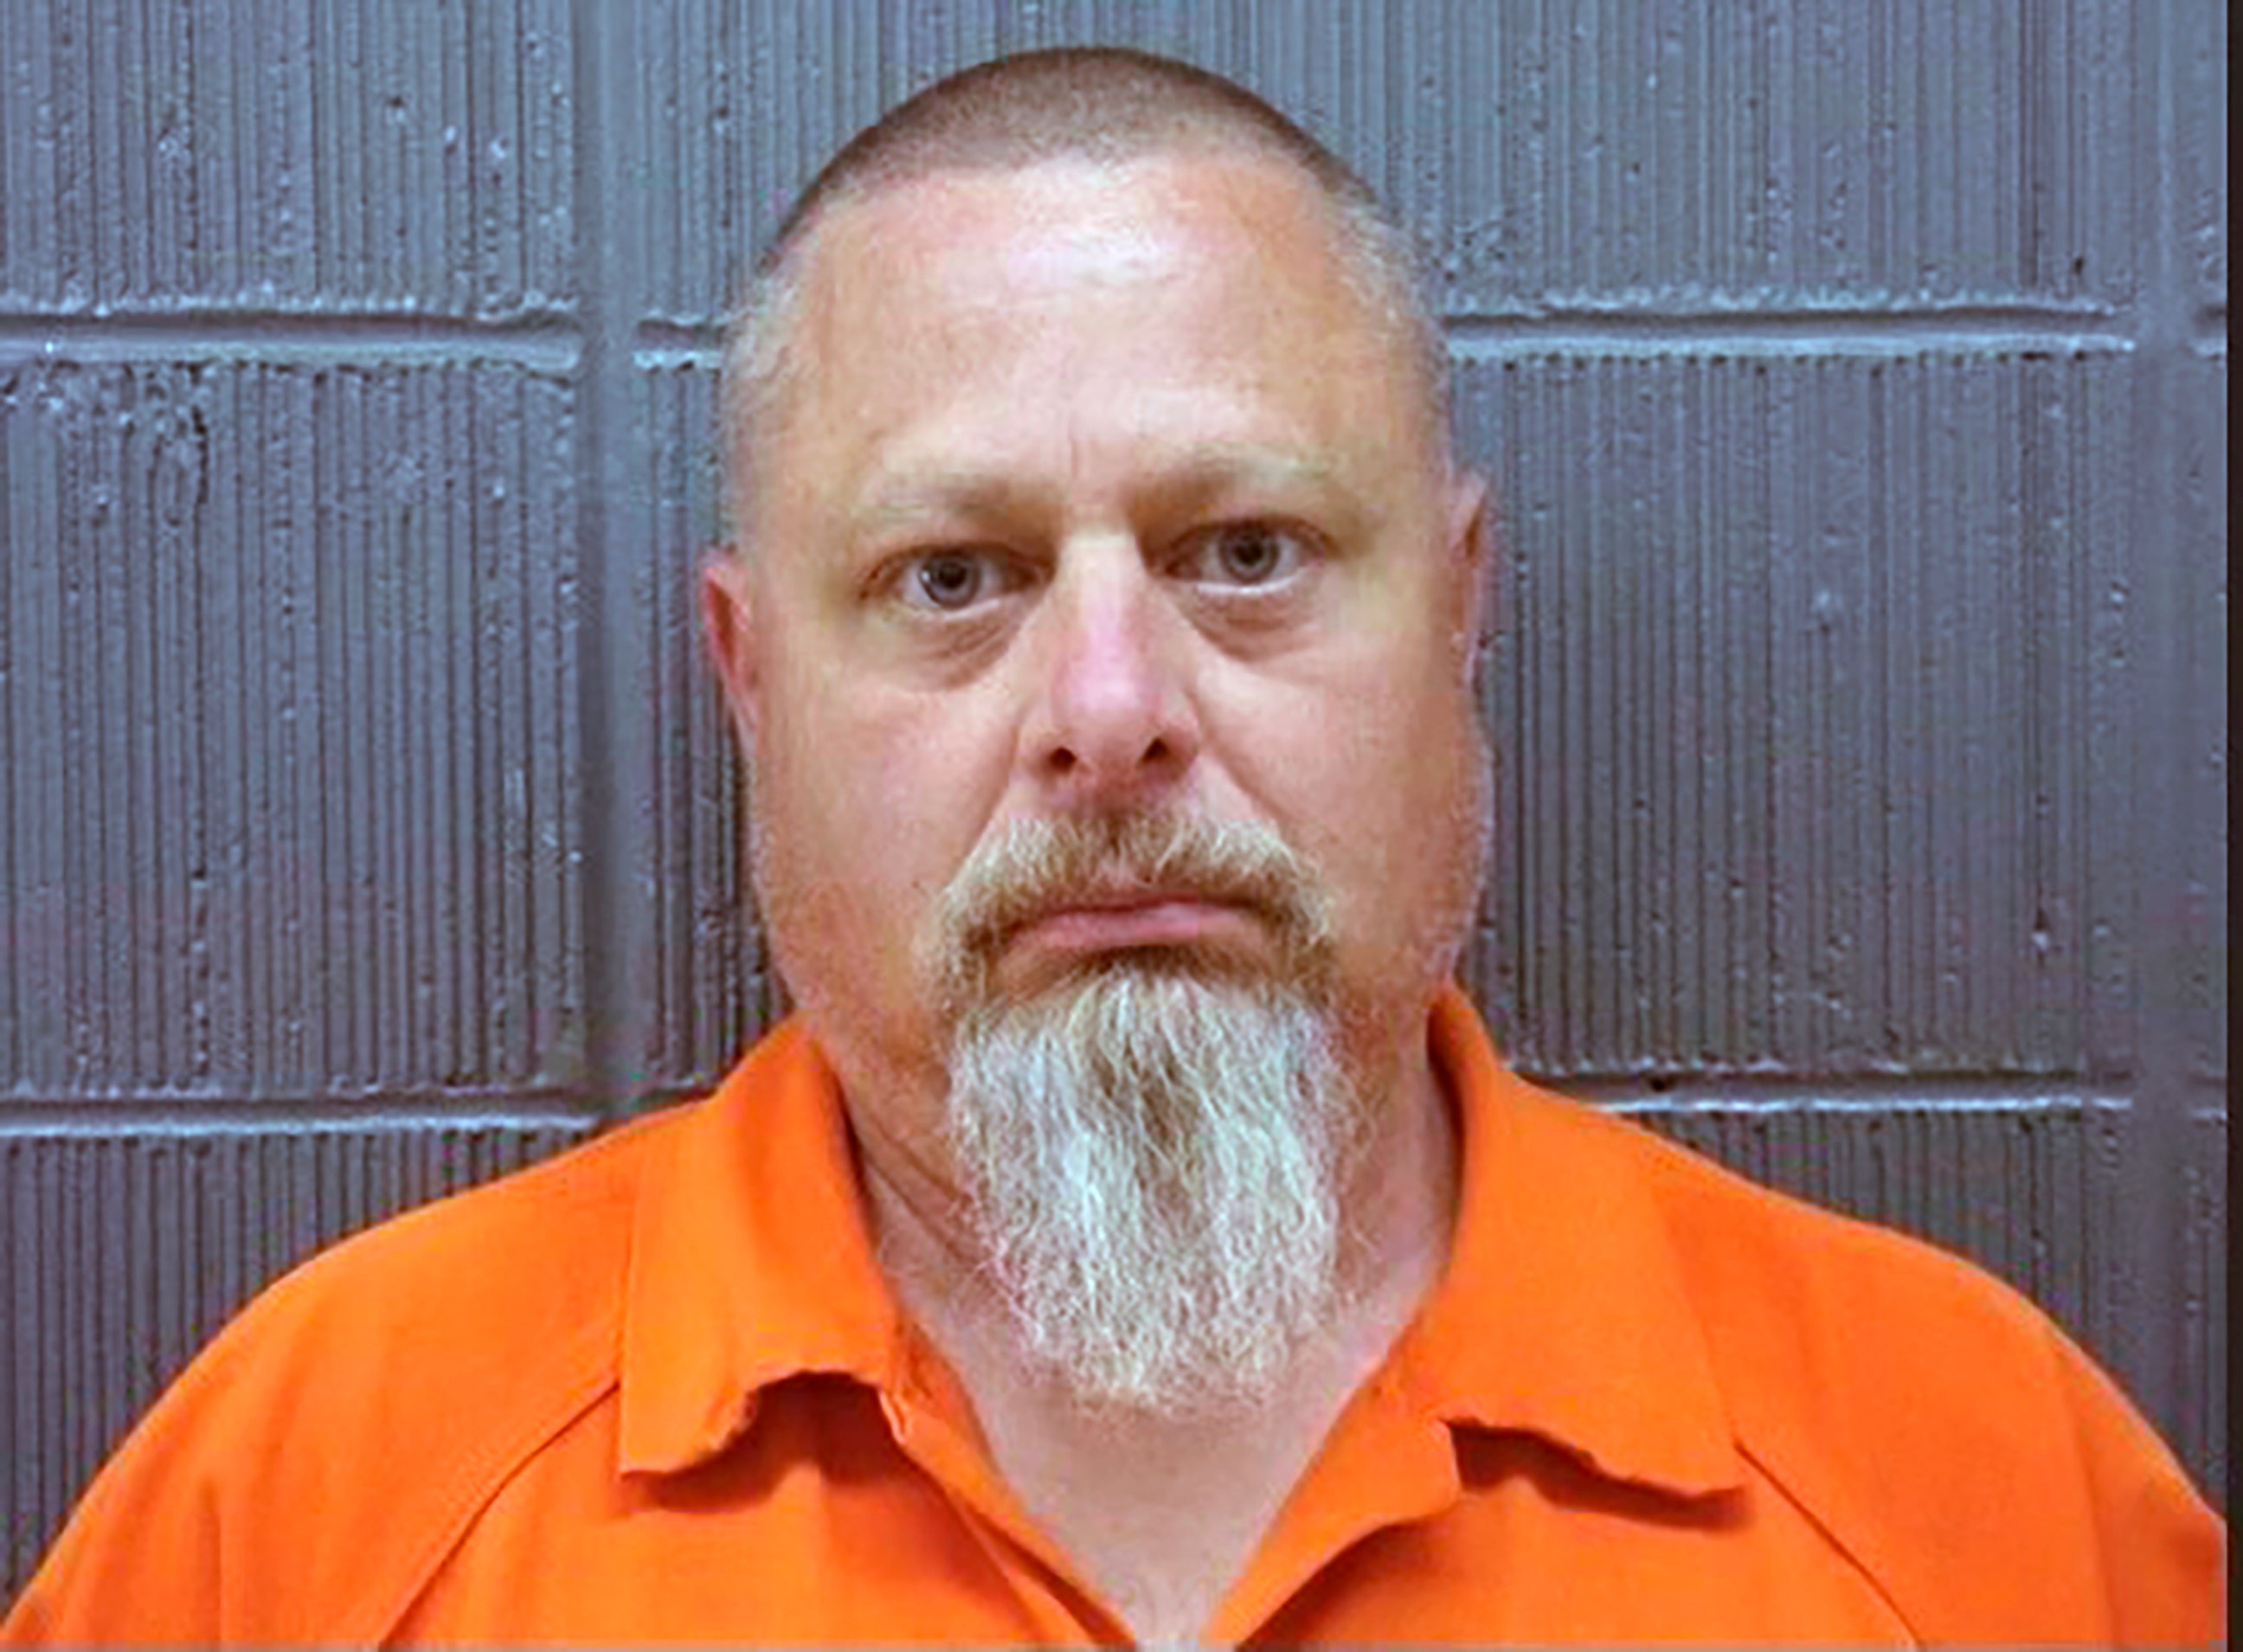 Richard Allen was arrested in October 2022, five years after Libby German and Abby Williams were killed in Delphi, Indiana